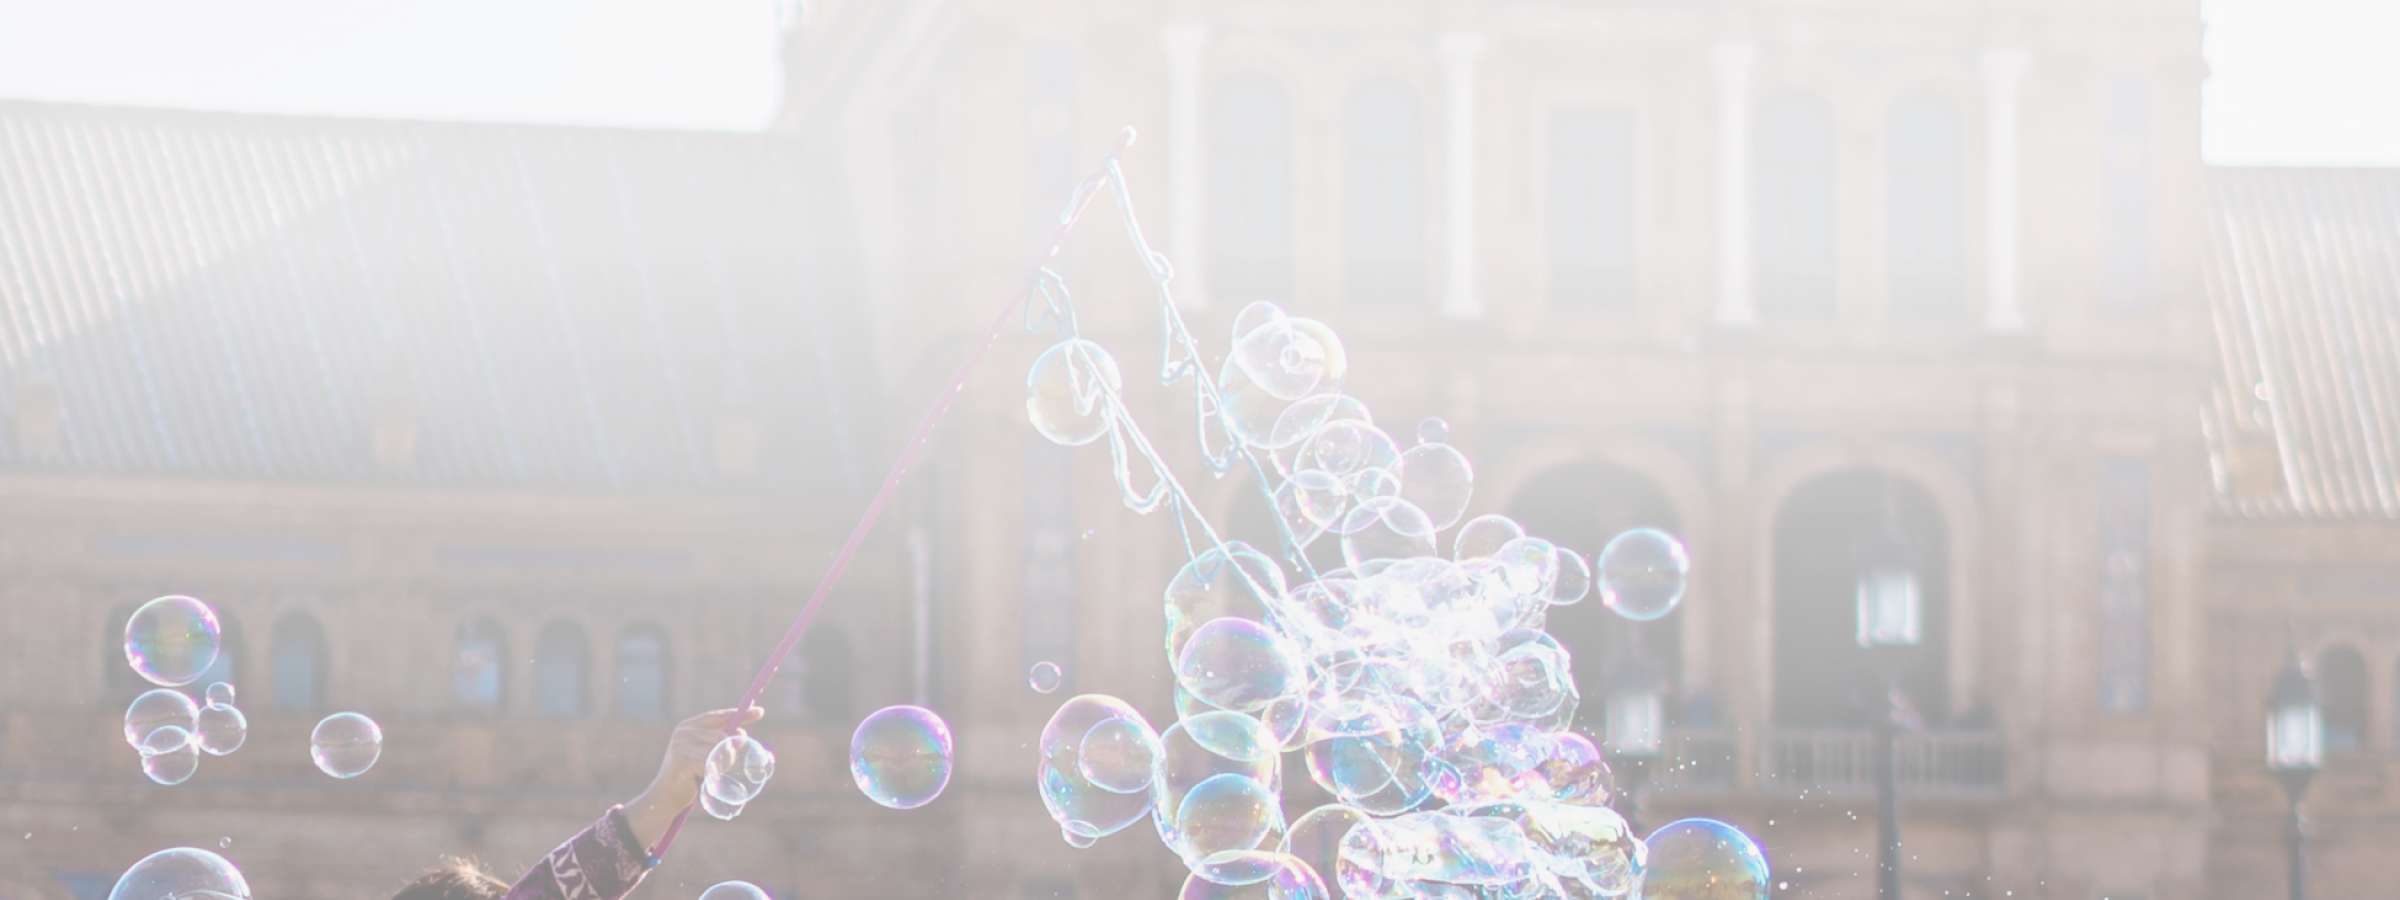 A man blows bubbles for a group of children in a city square